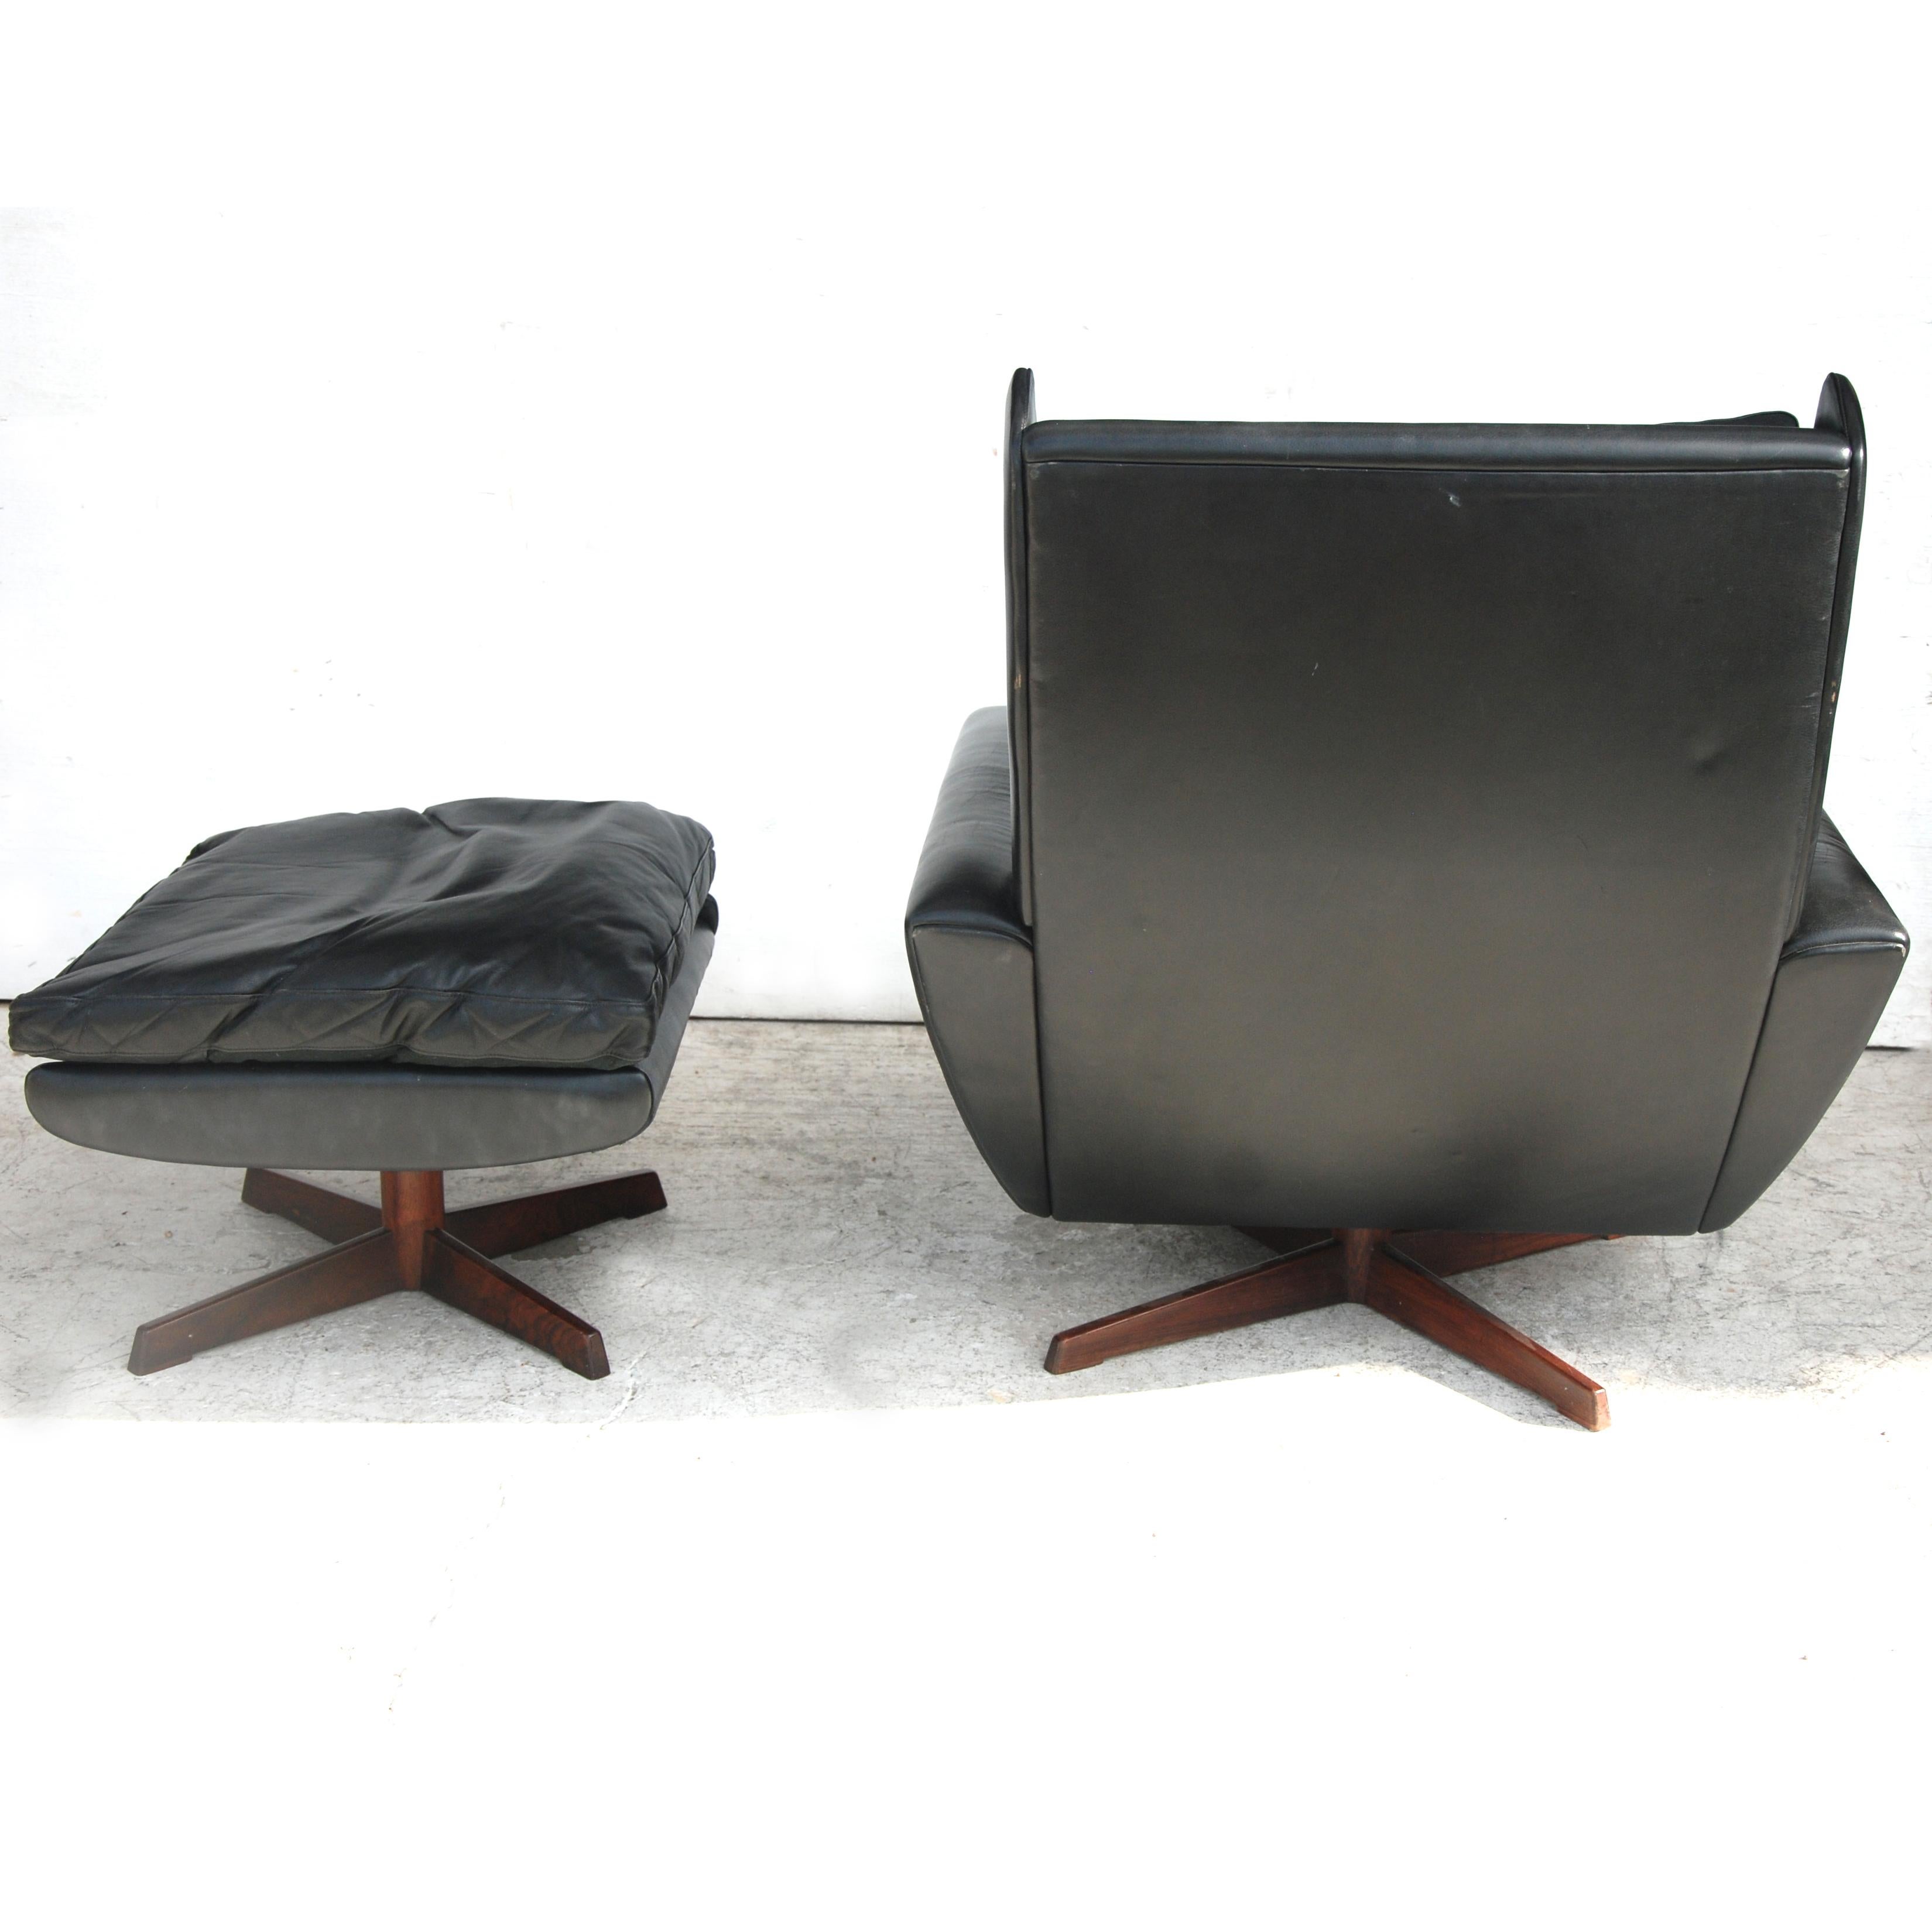 Mid-Century Modern Rosewood Lounge Chair and Ottoman by Georg Thams for Vejen Polstermøbelfabrik